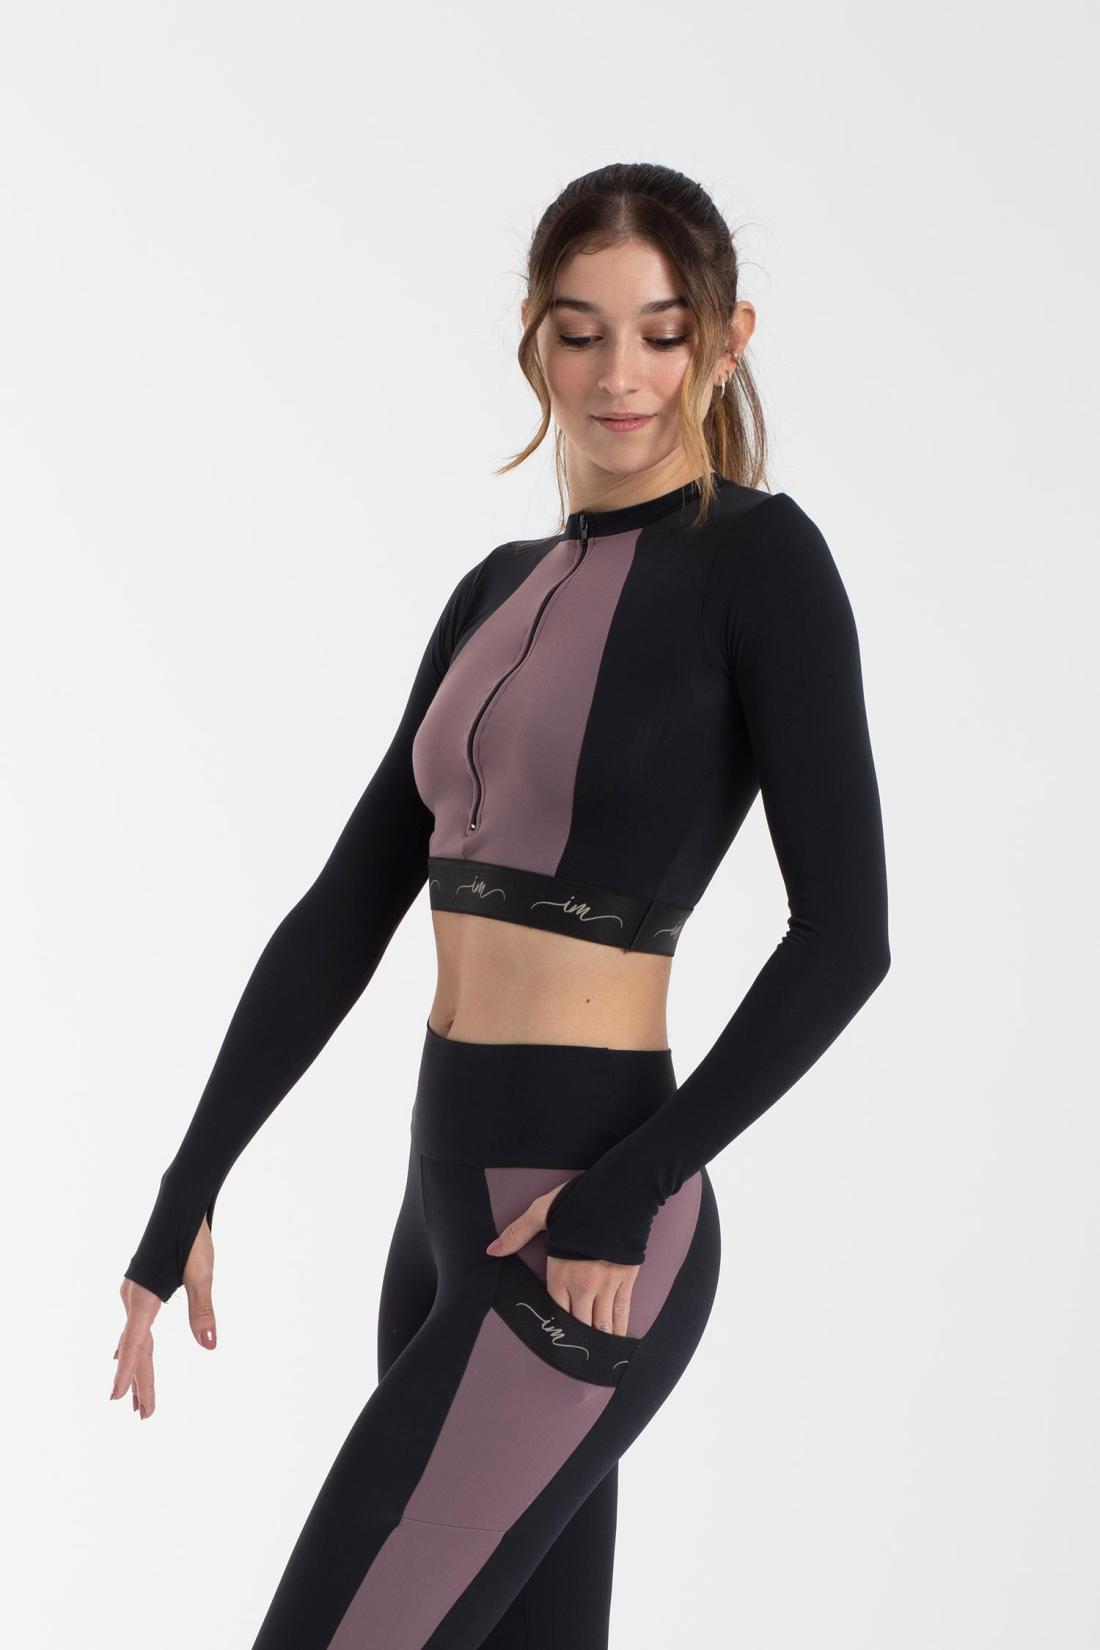 Bicolor Brenda Long-Sleeve Top with brushed fabric inside for Figure Skating by Intermezzo